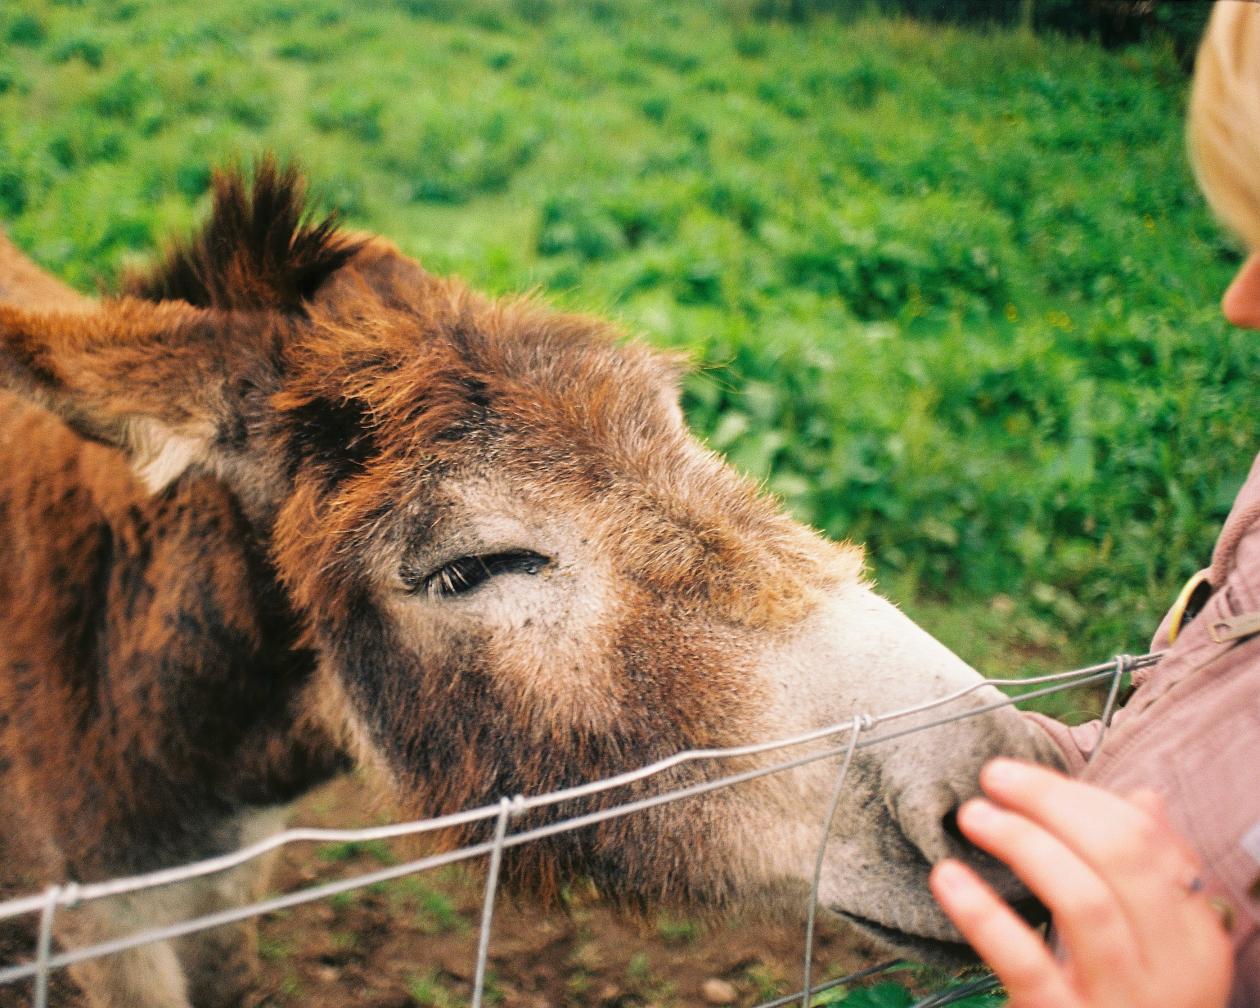 A pony sniffs a student's hands through wire fence at Causey Farm in Ireland.